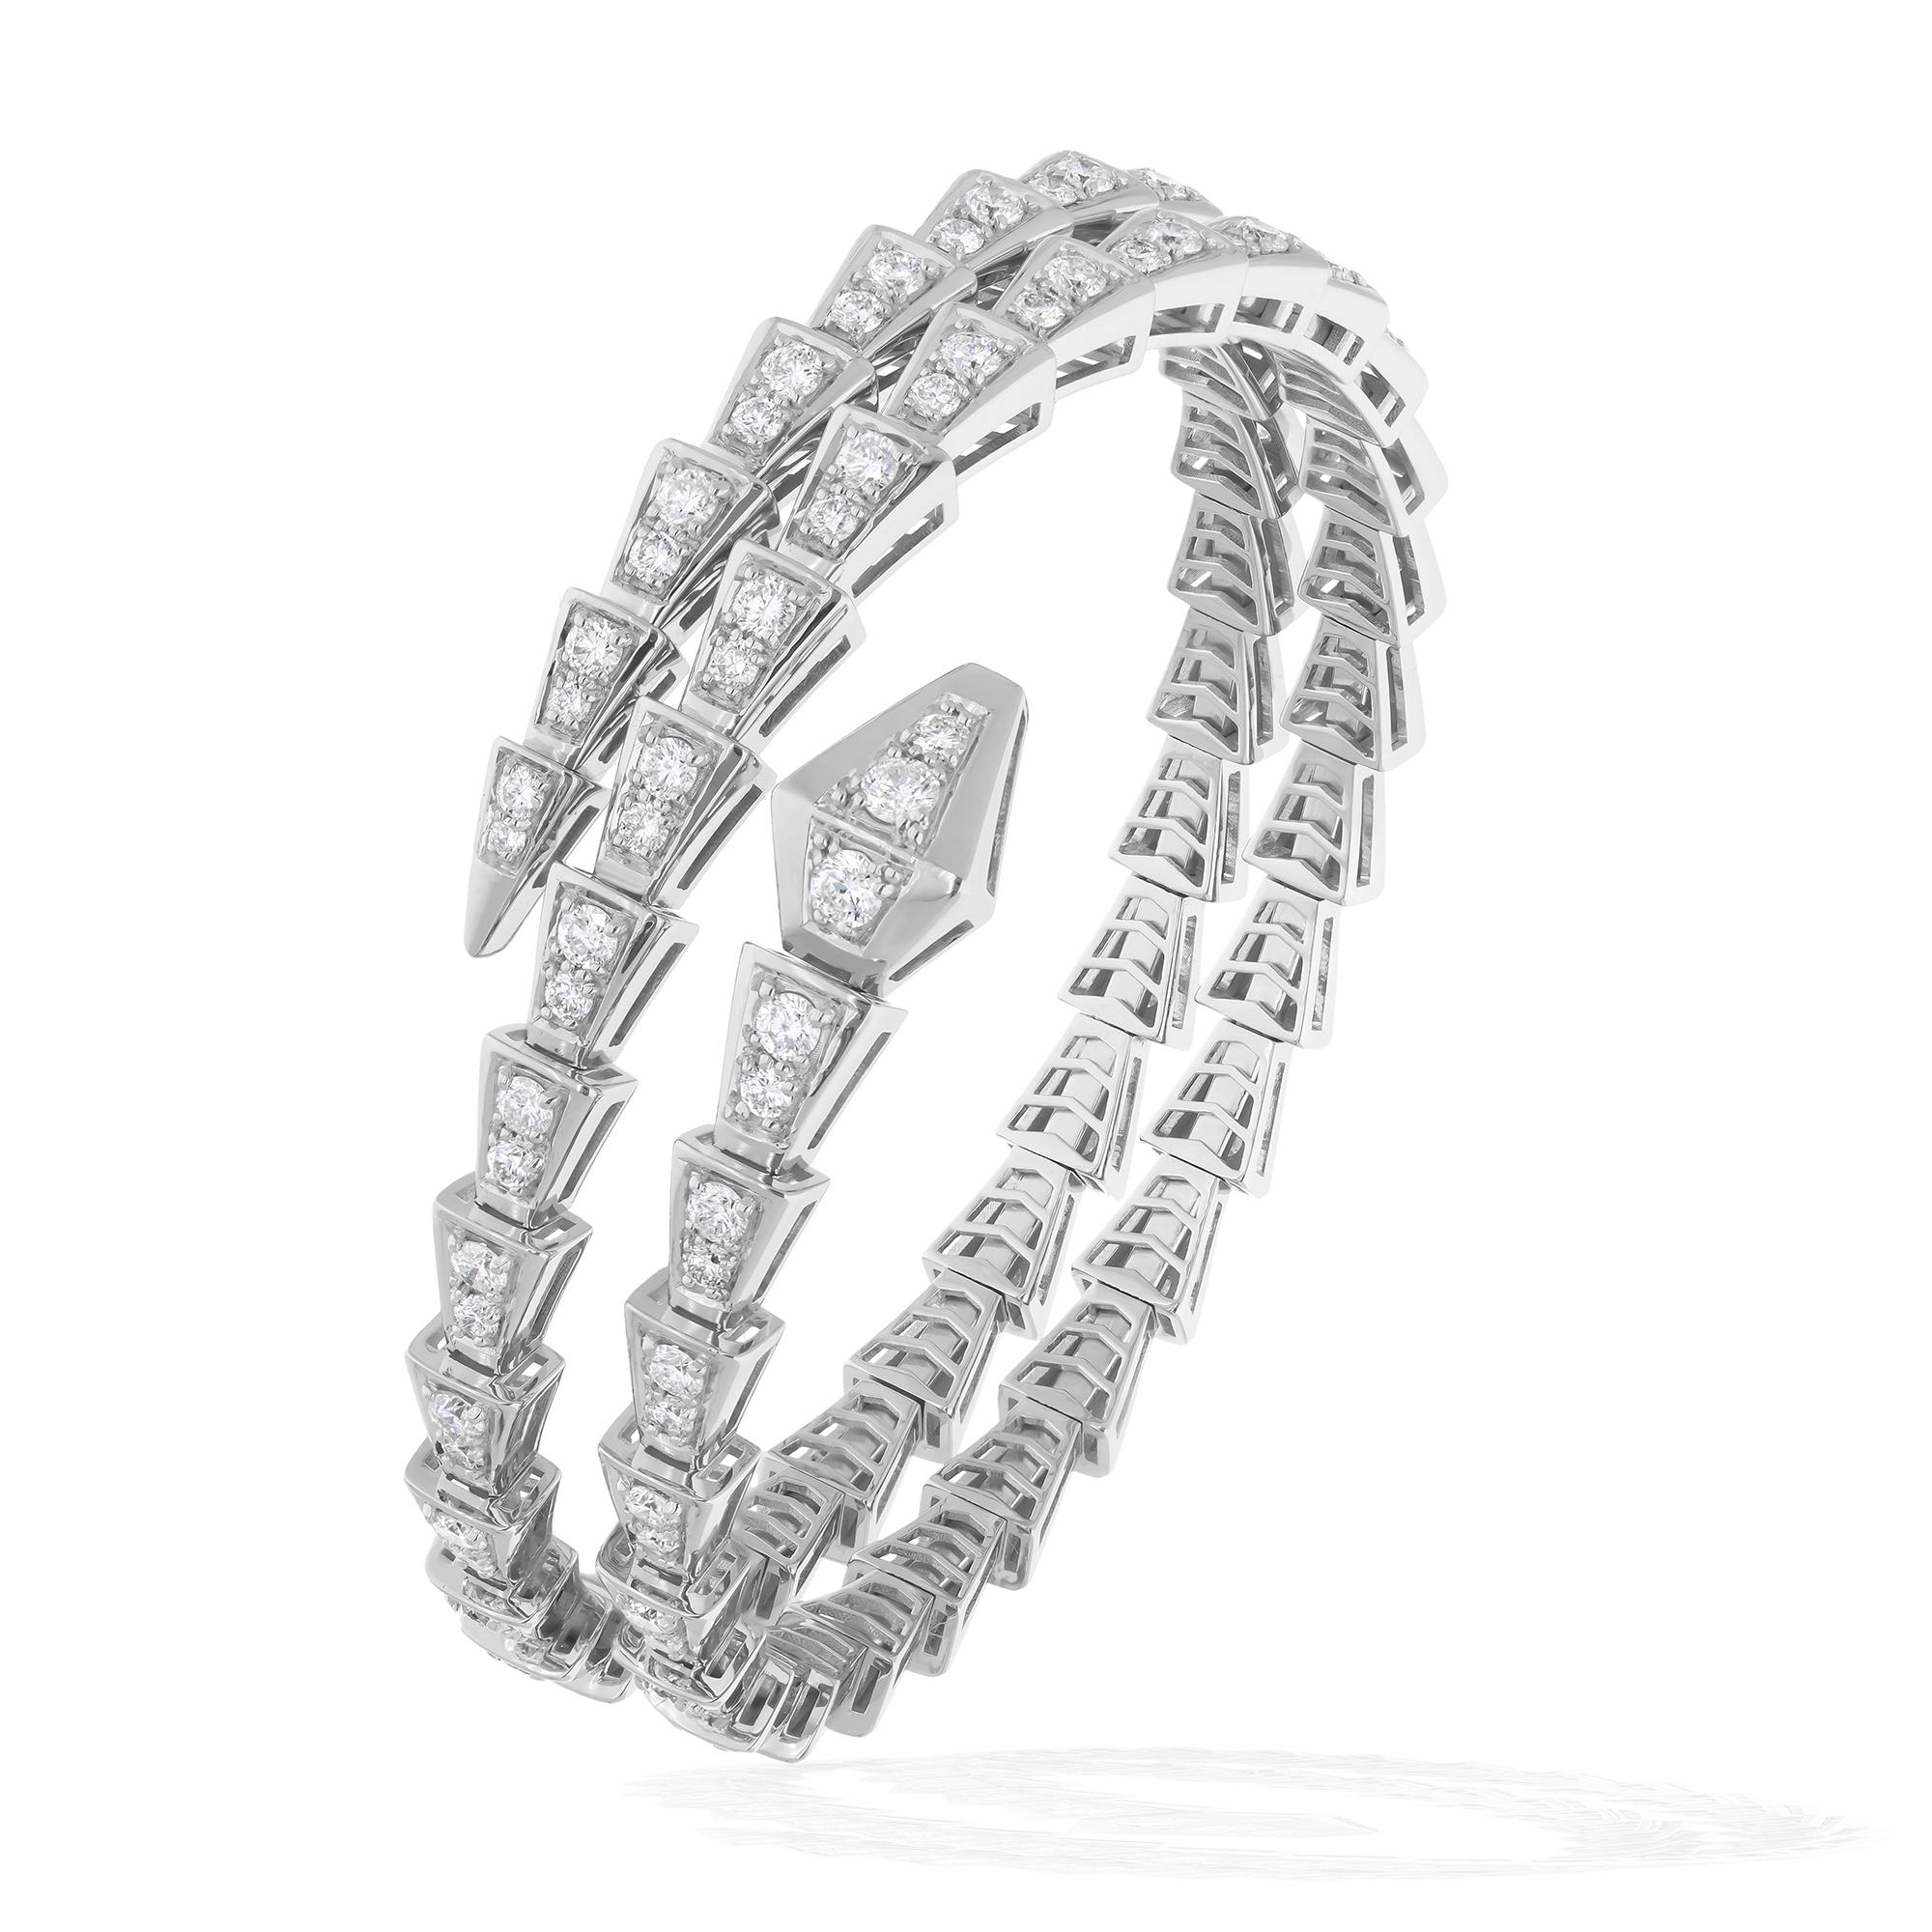 At its heart lies a magnificent 4.82 carat diamond, boasting SI clarity and HI color, radiating brilliance and fire with every movement. Set in a striking snake design, the diamonds coil around the wrist in a captivating embrace, exuding a sense of